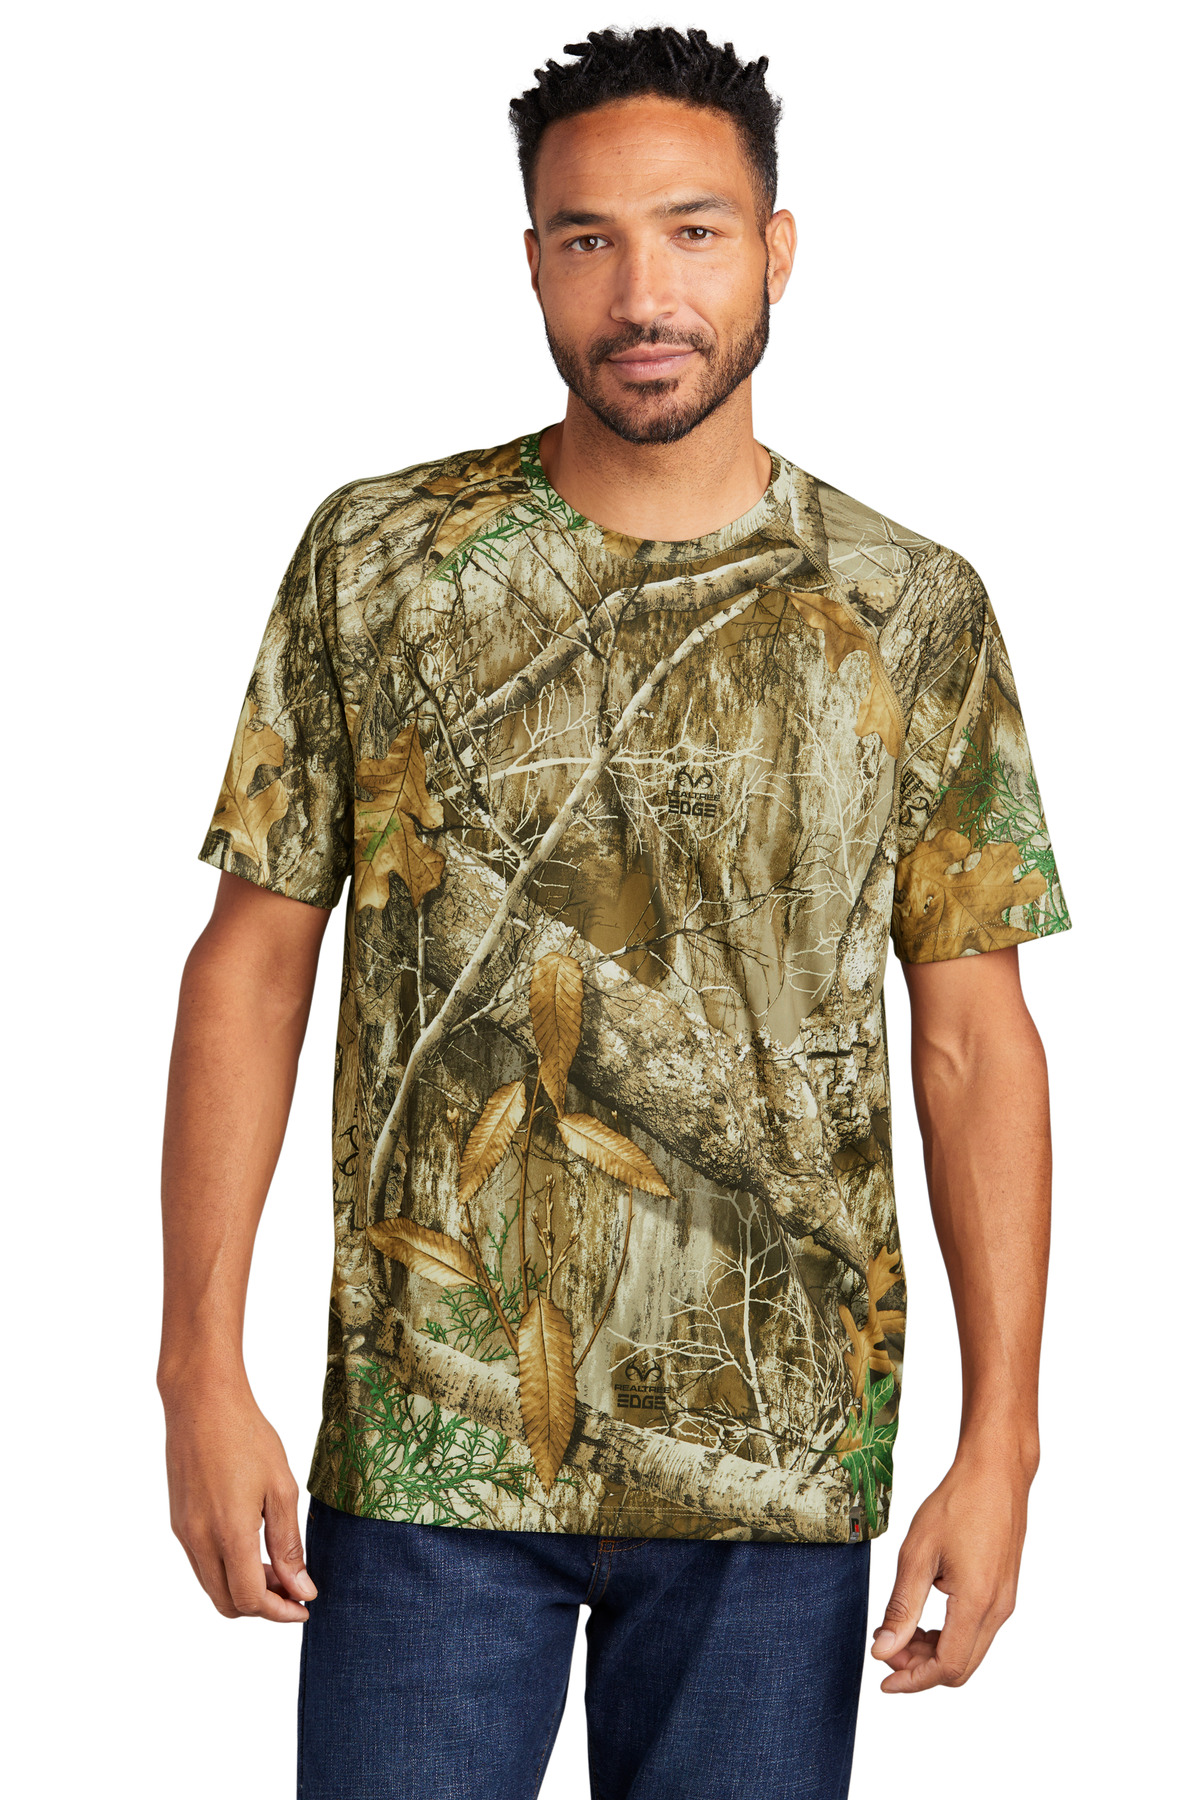 Russell Outdoors Realtree Performance Tee-Russell Outdoors